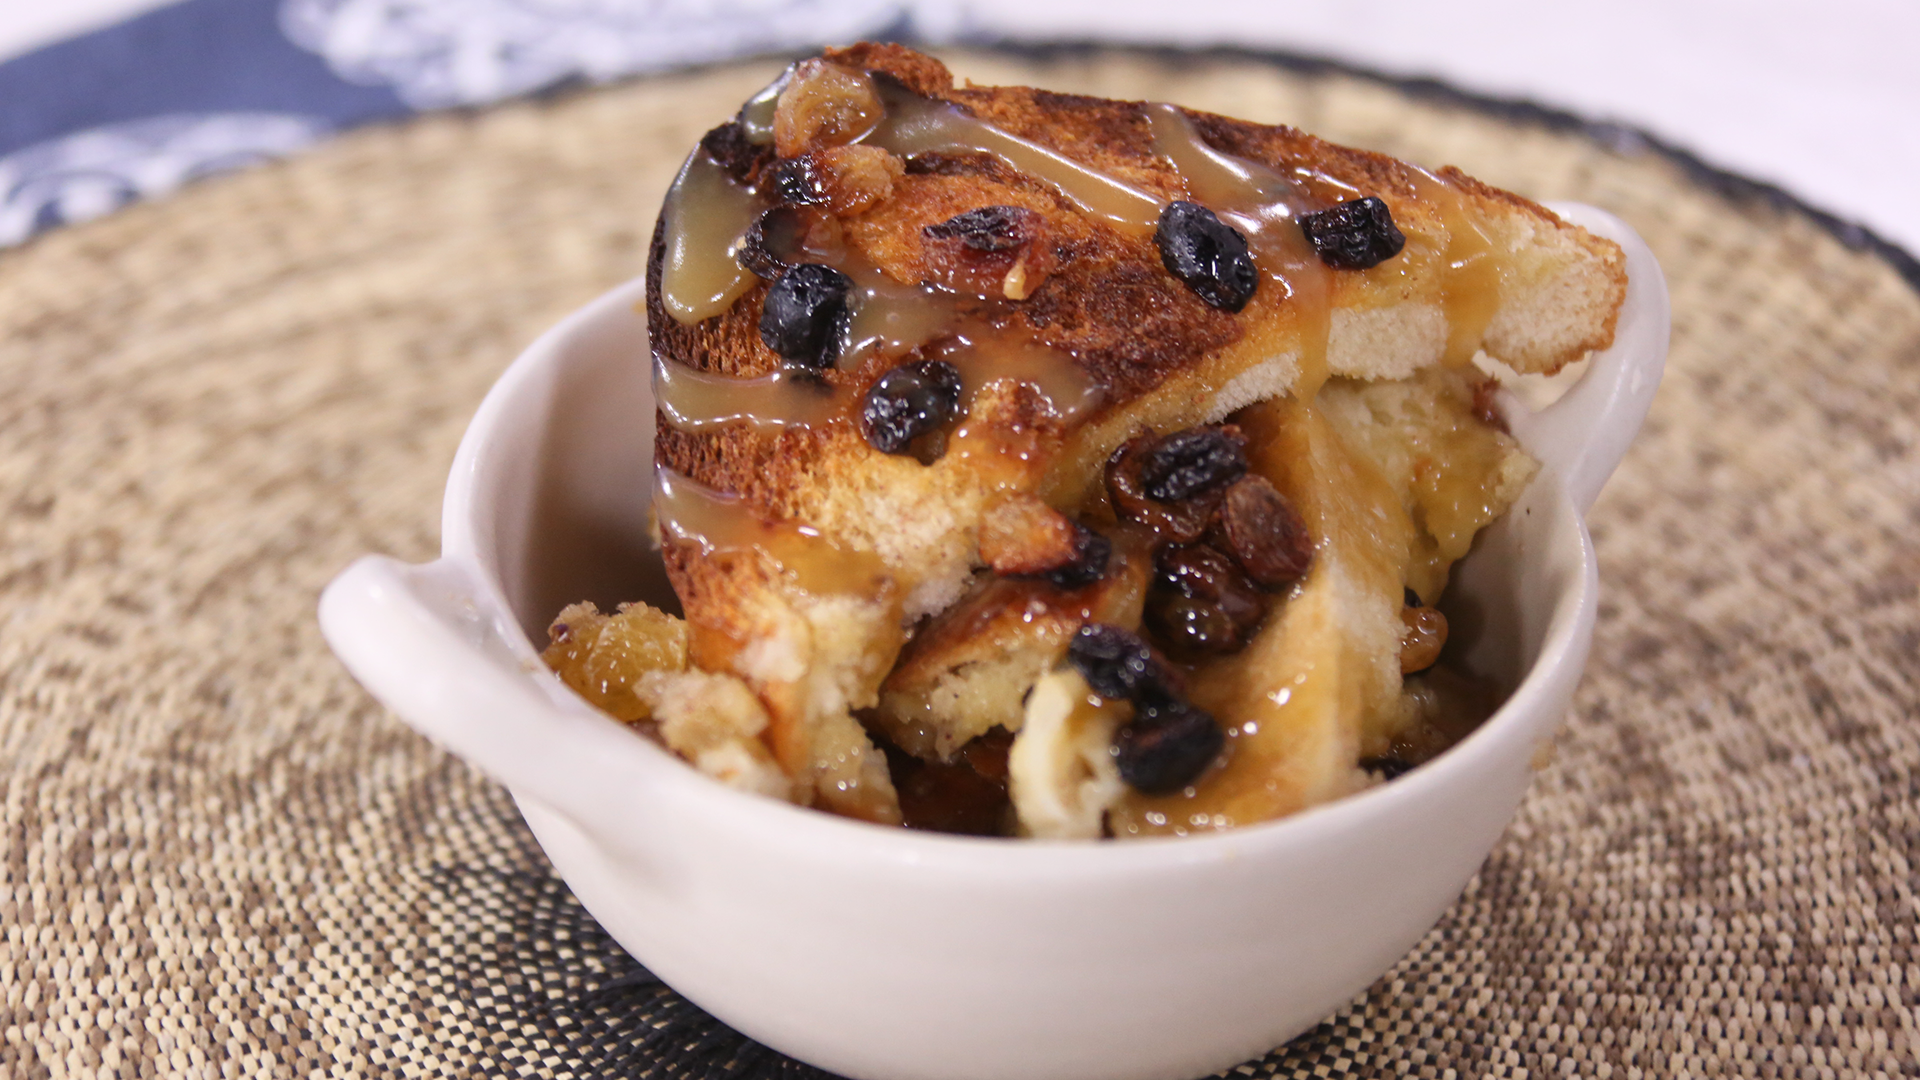 Salted caramel bread and butter pudding